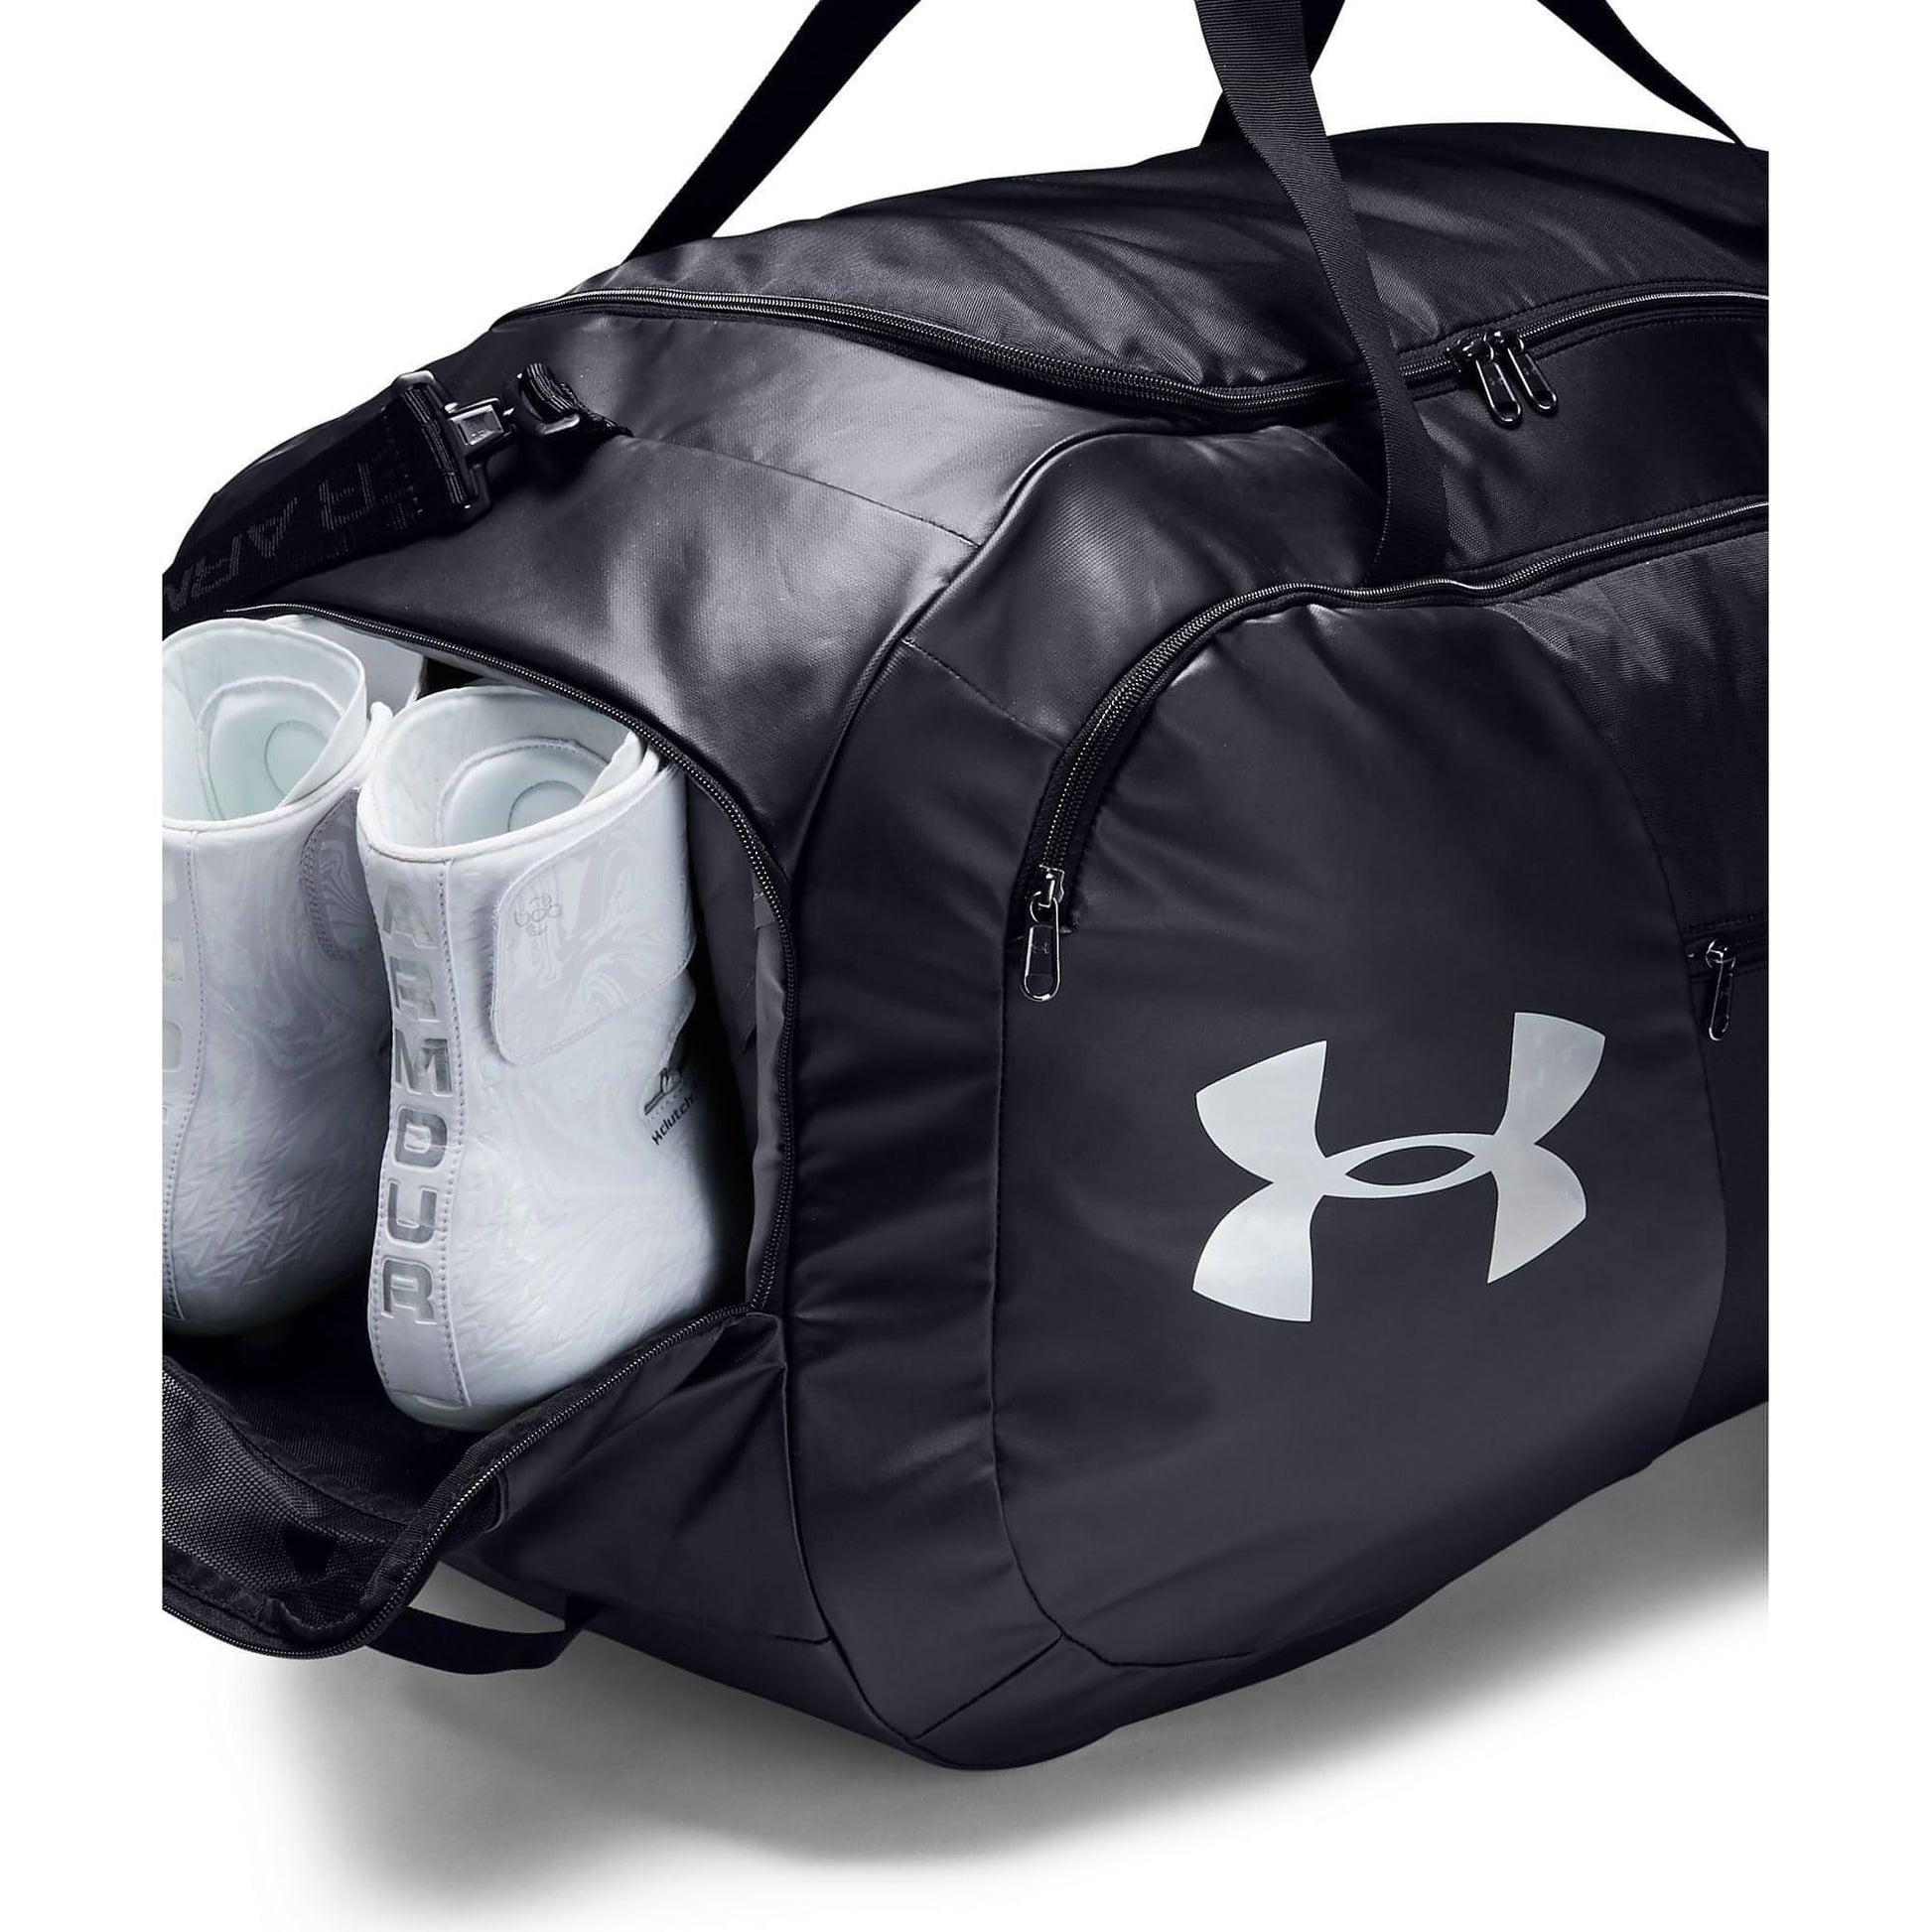 Under Armour Undeniable Xl Holdall Details